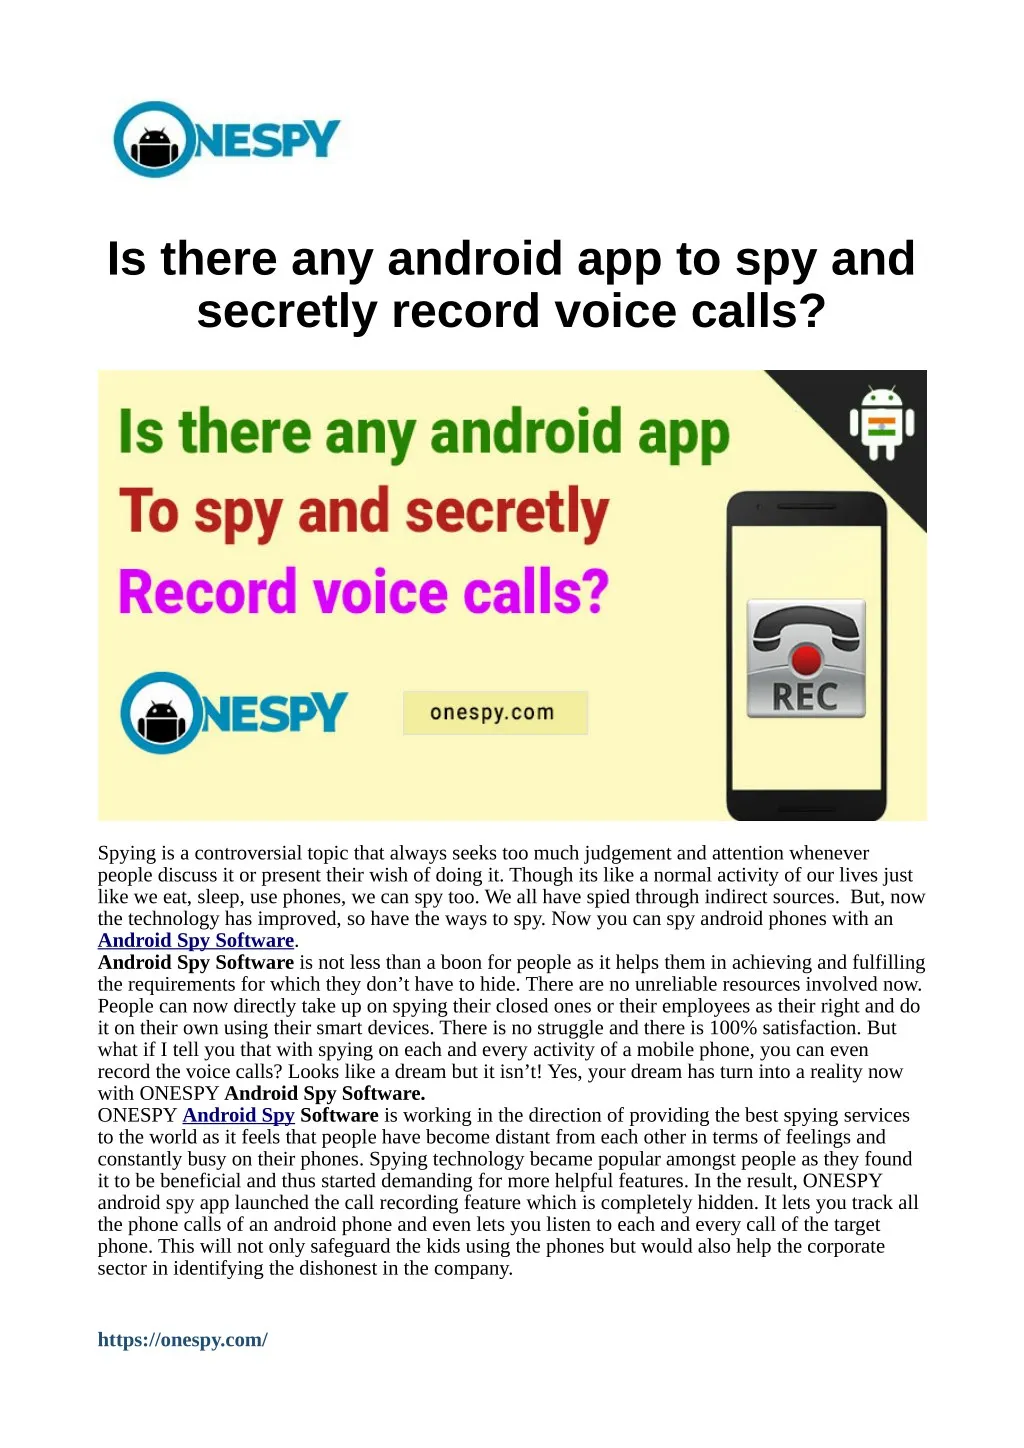 is there any android app to spy and secretly